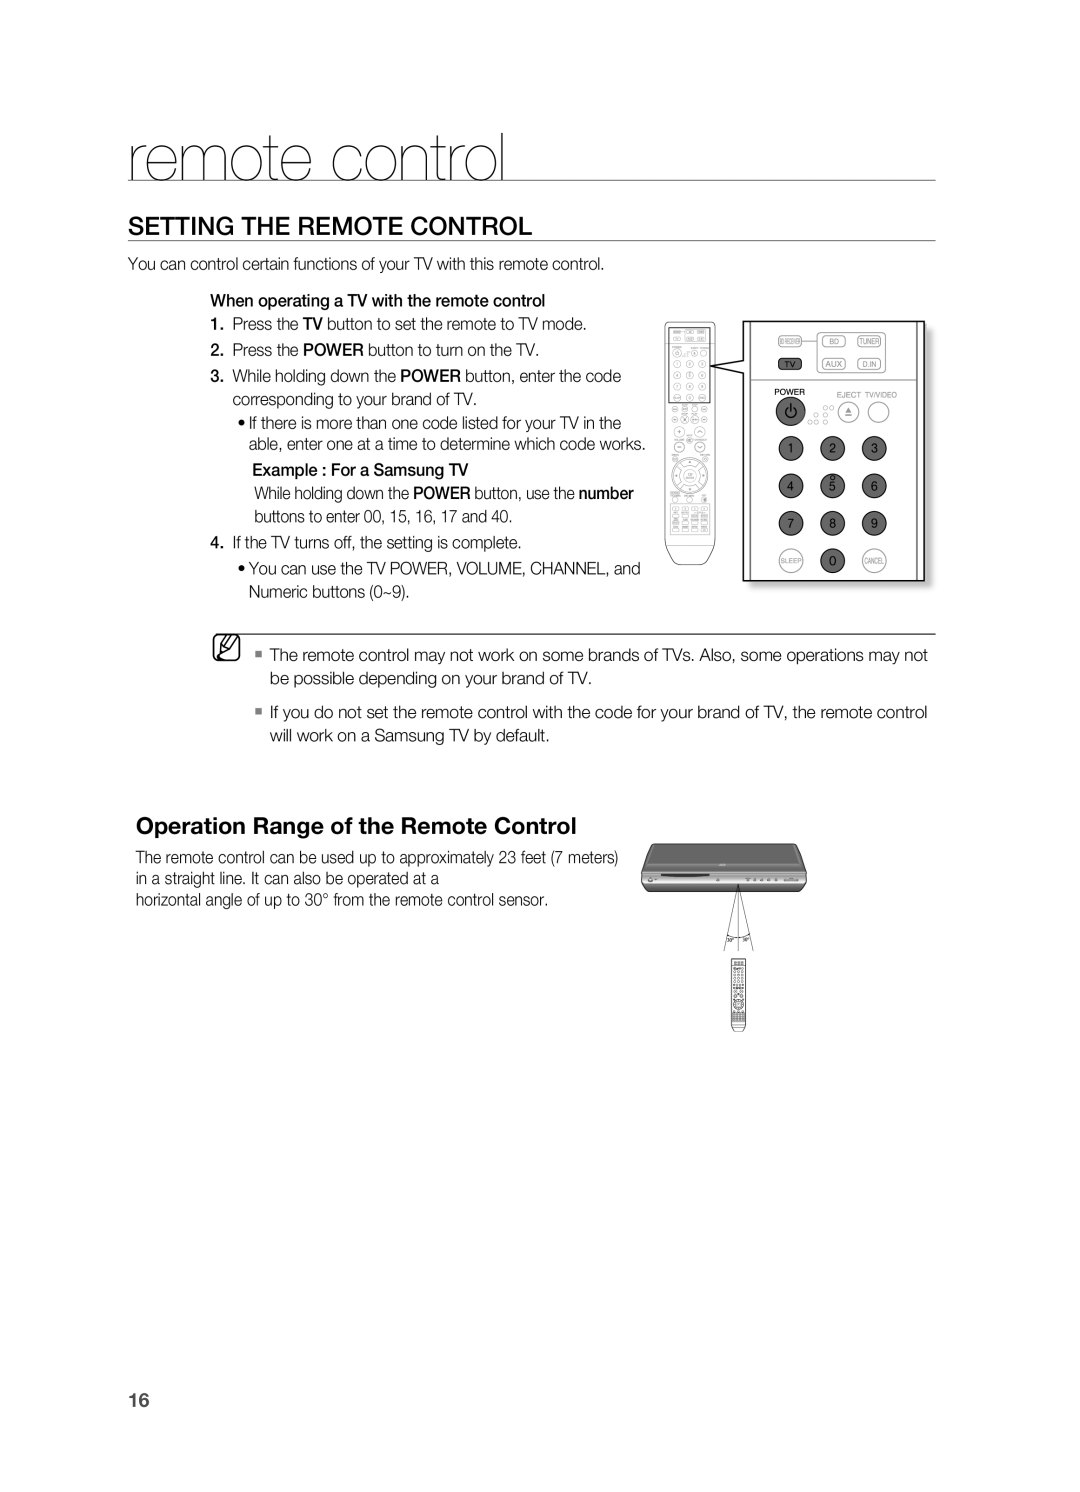 Samsung AH68-02019S manual SETTIng THE REMOTE COnTROL, Operation Range of the Remote Control, remote control 